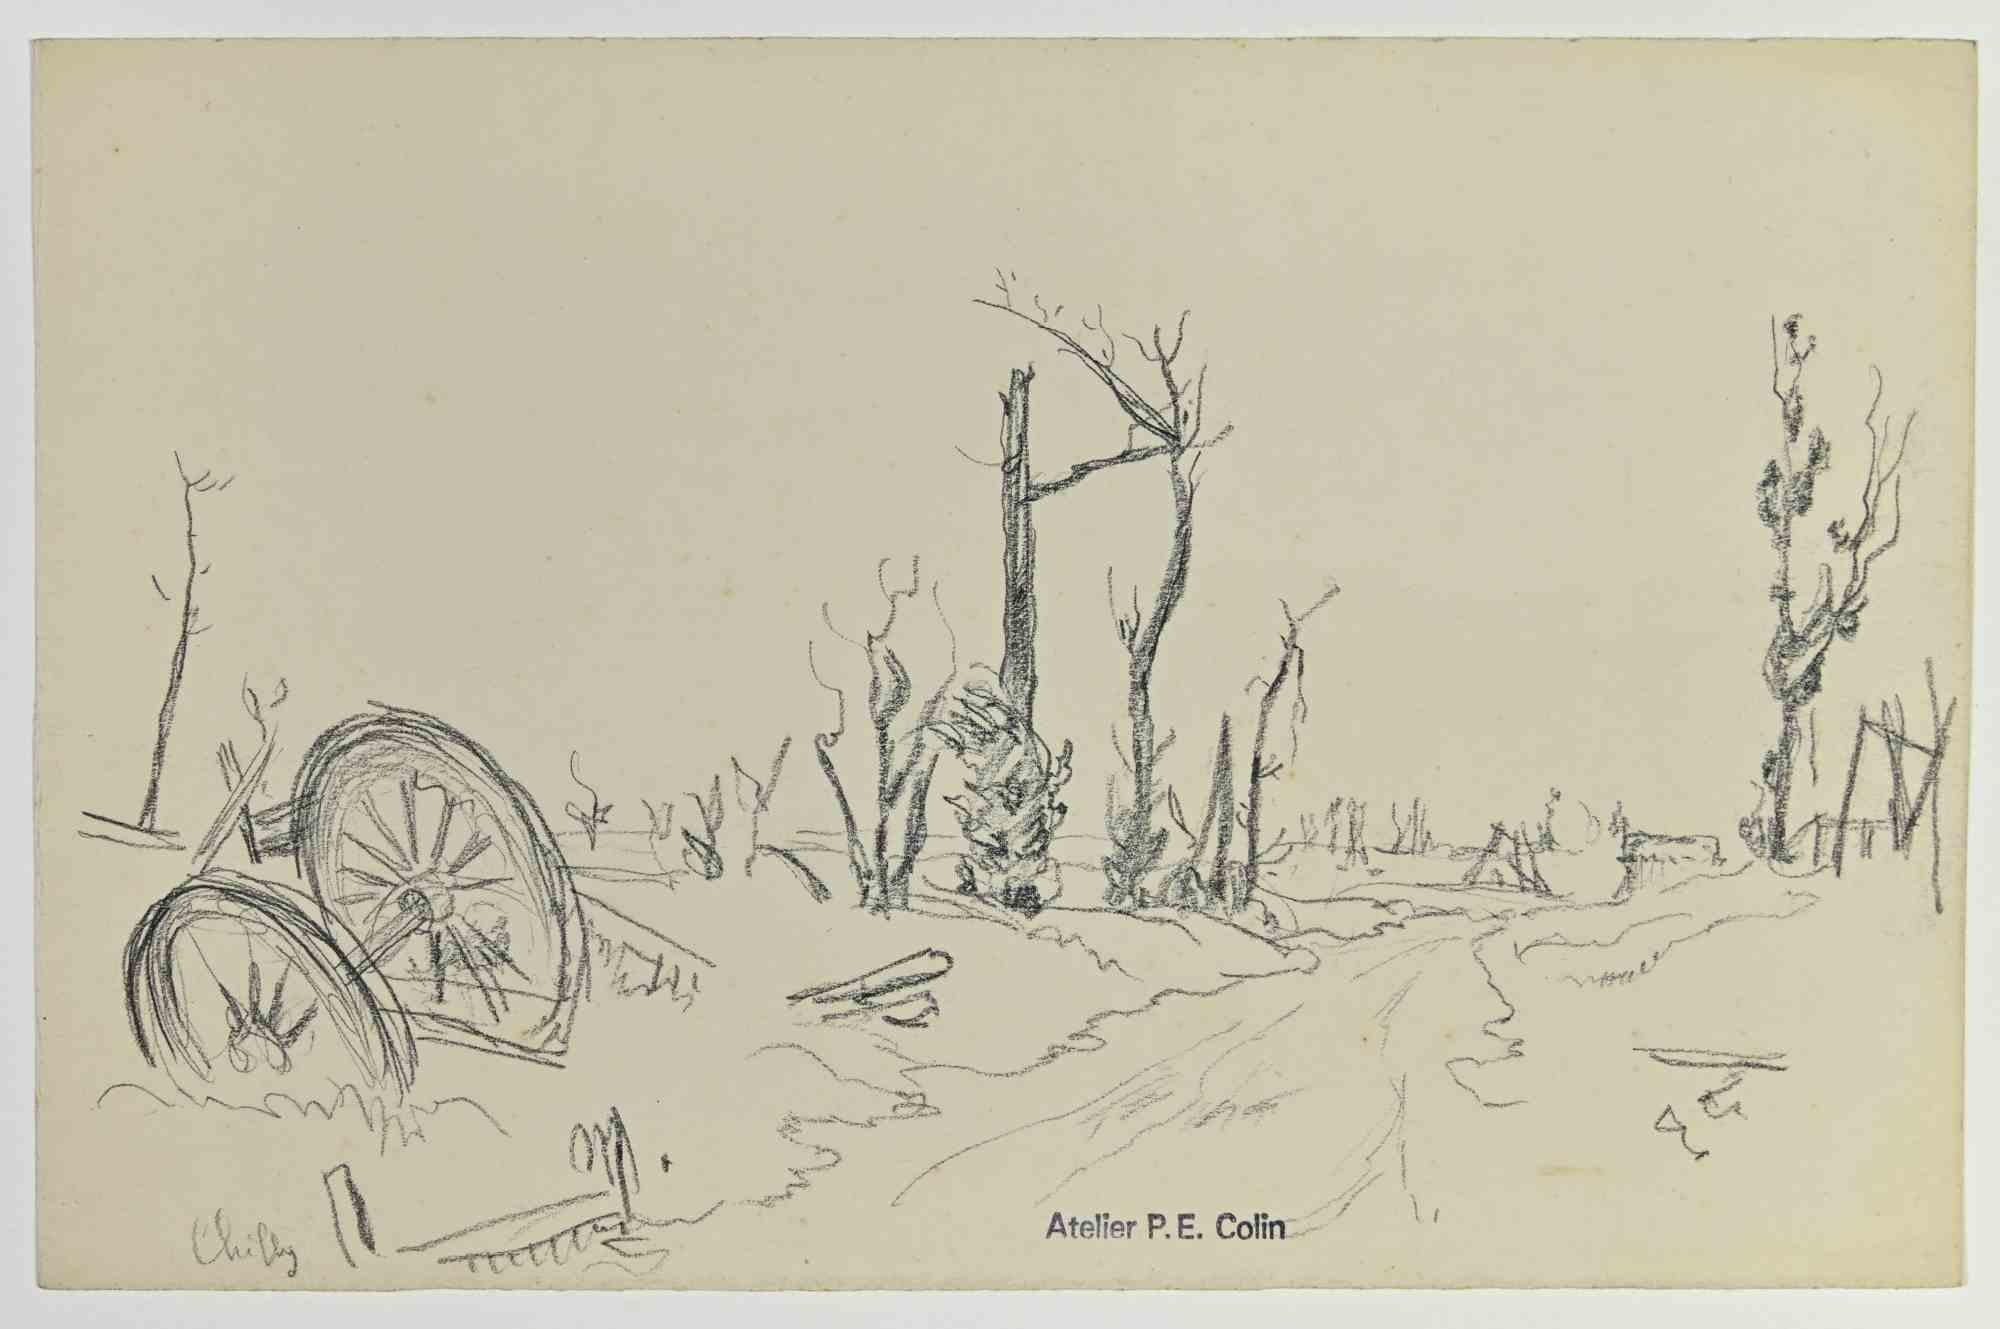 The Road is a drawing realized by Paul Emile Colin in the early 20th Century.

Carbon Pencil on ivory-colored paper

Stamped on the lower.

Good conditions with slight foxing.

The artwork is realized through deft expressive strokes.